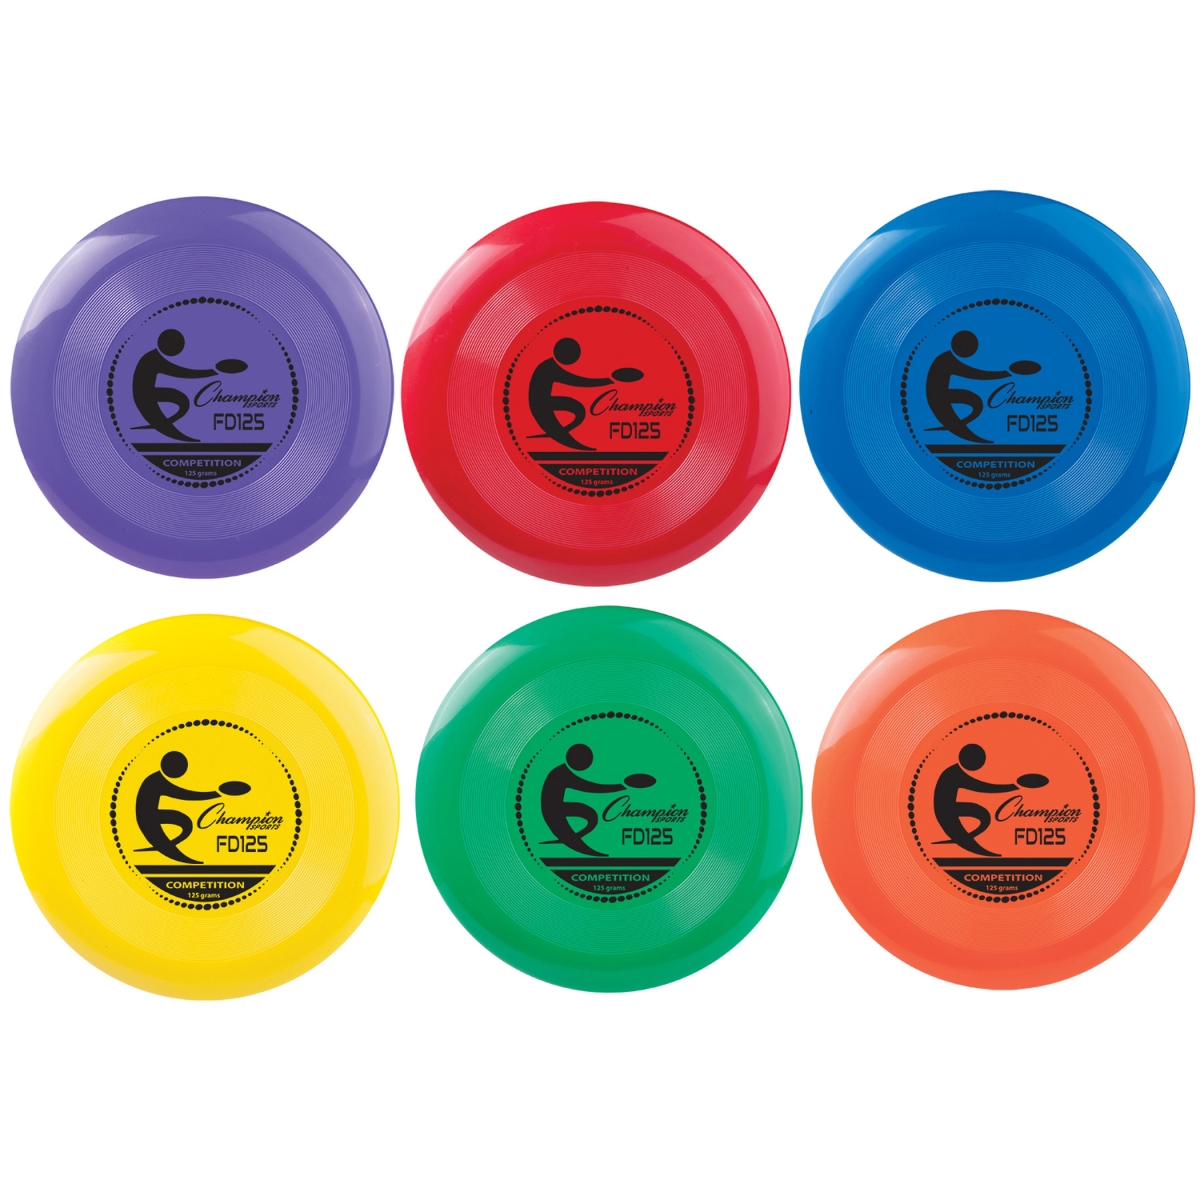 Chsfd125bn Plastic Disc - Assorted Color, Pack Of 12